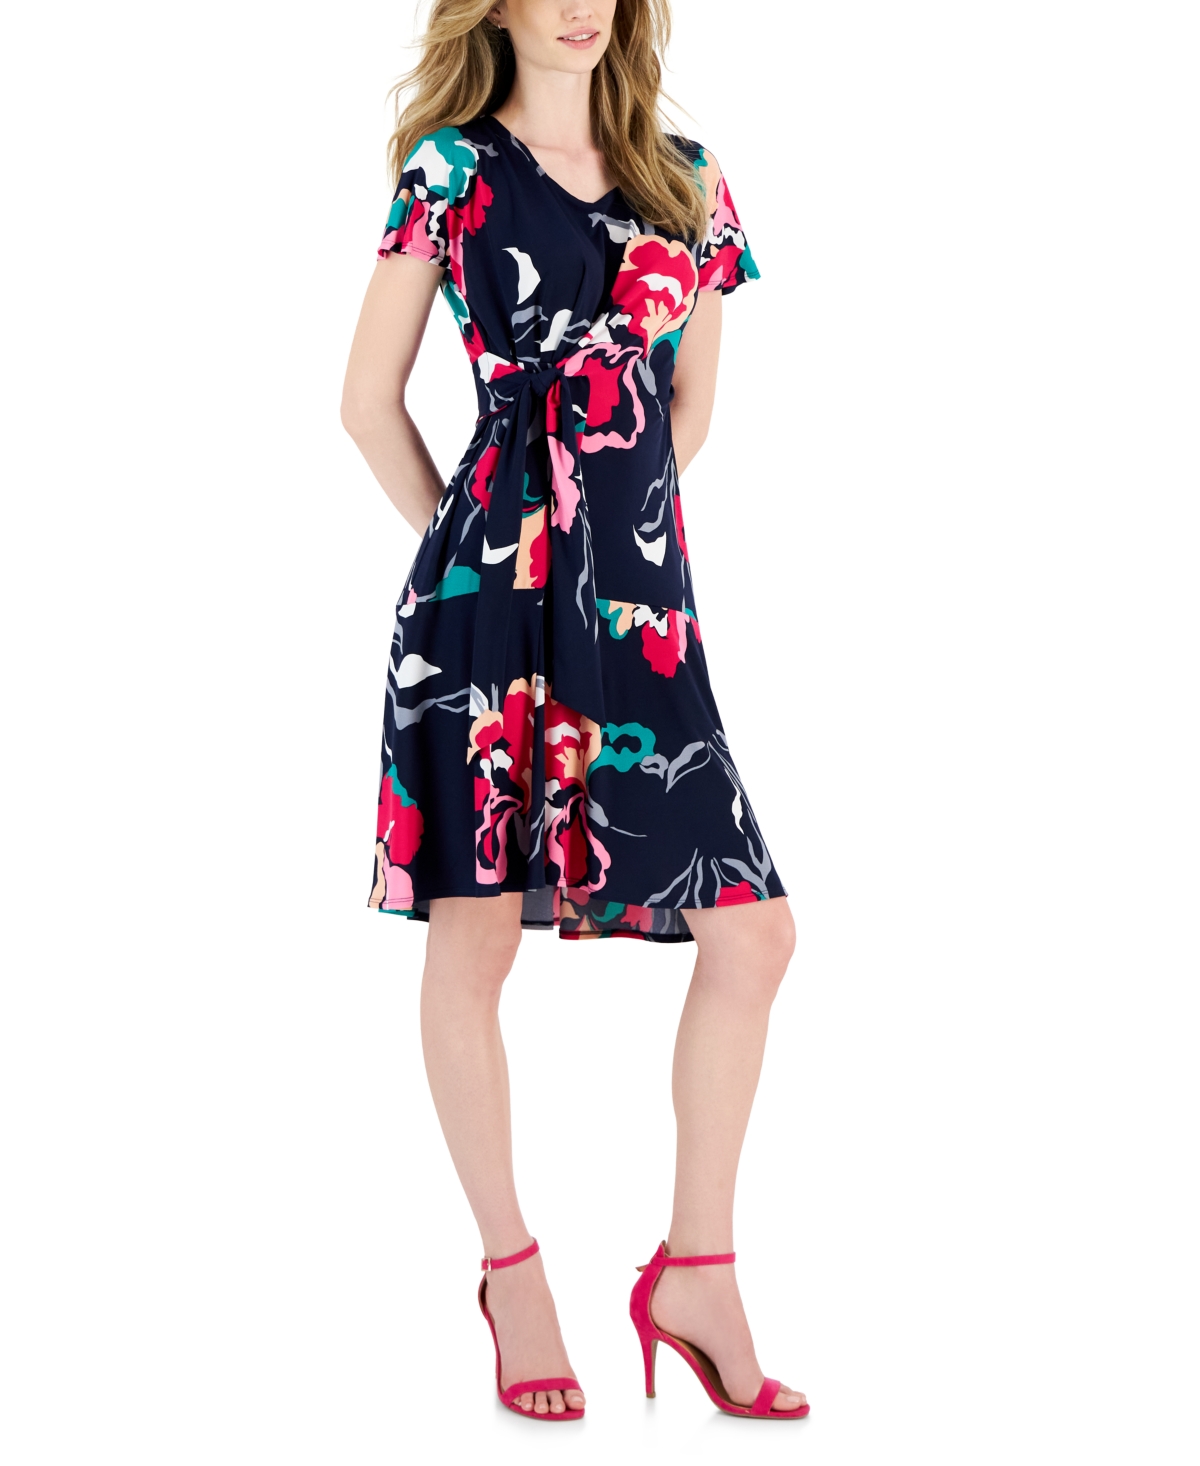 Petite Printed Tied-Side Fit & Flare Dress - Navy/pink/